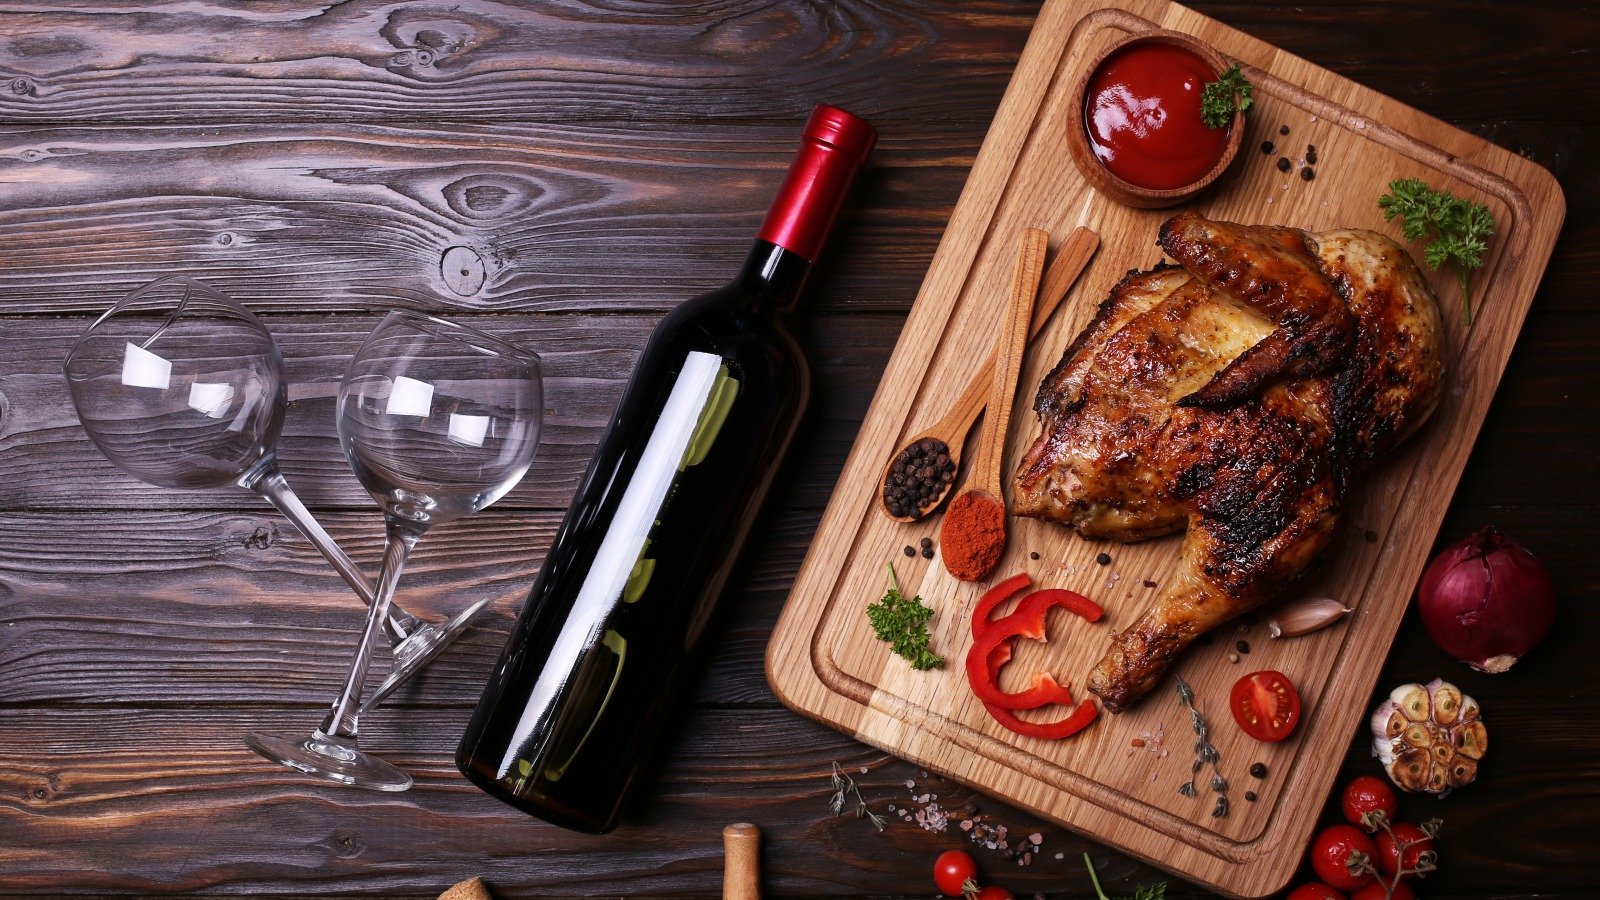 This Wine Goes Best With Roast Chicken